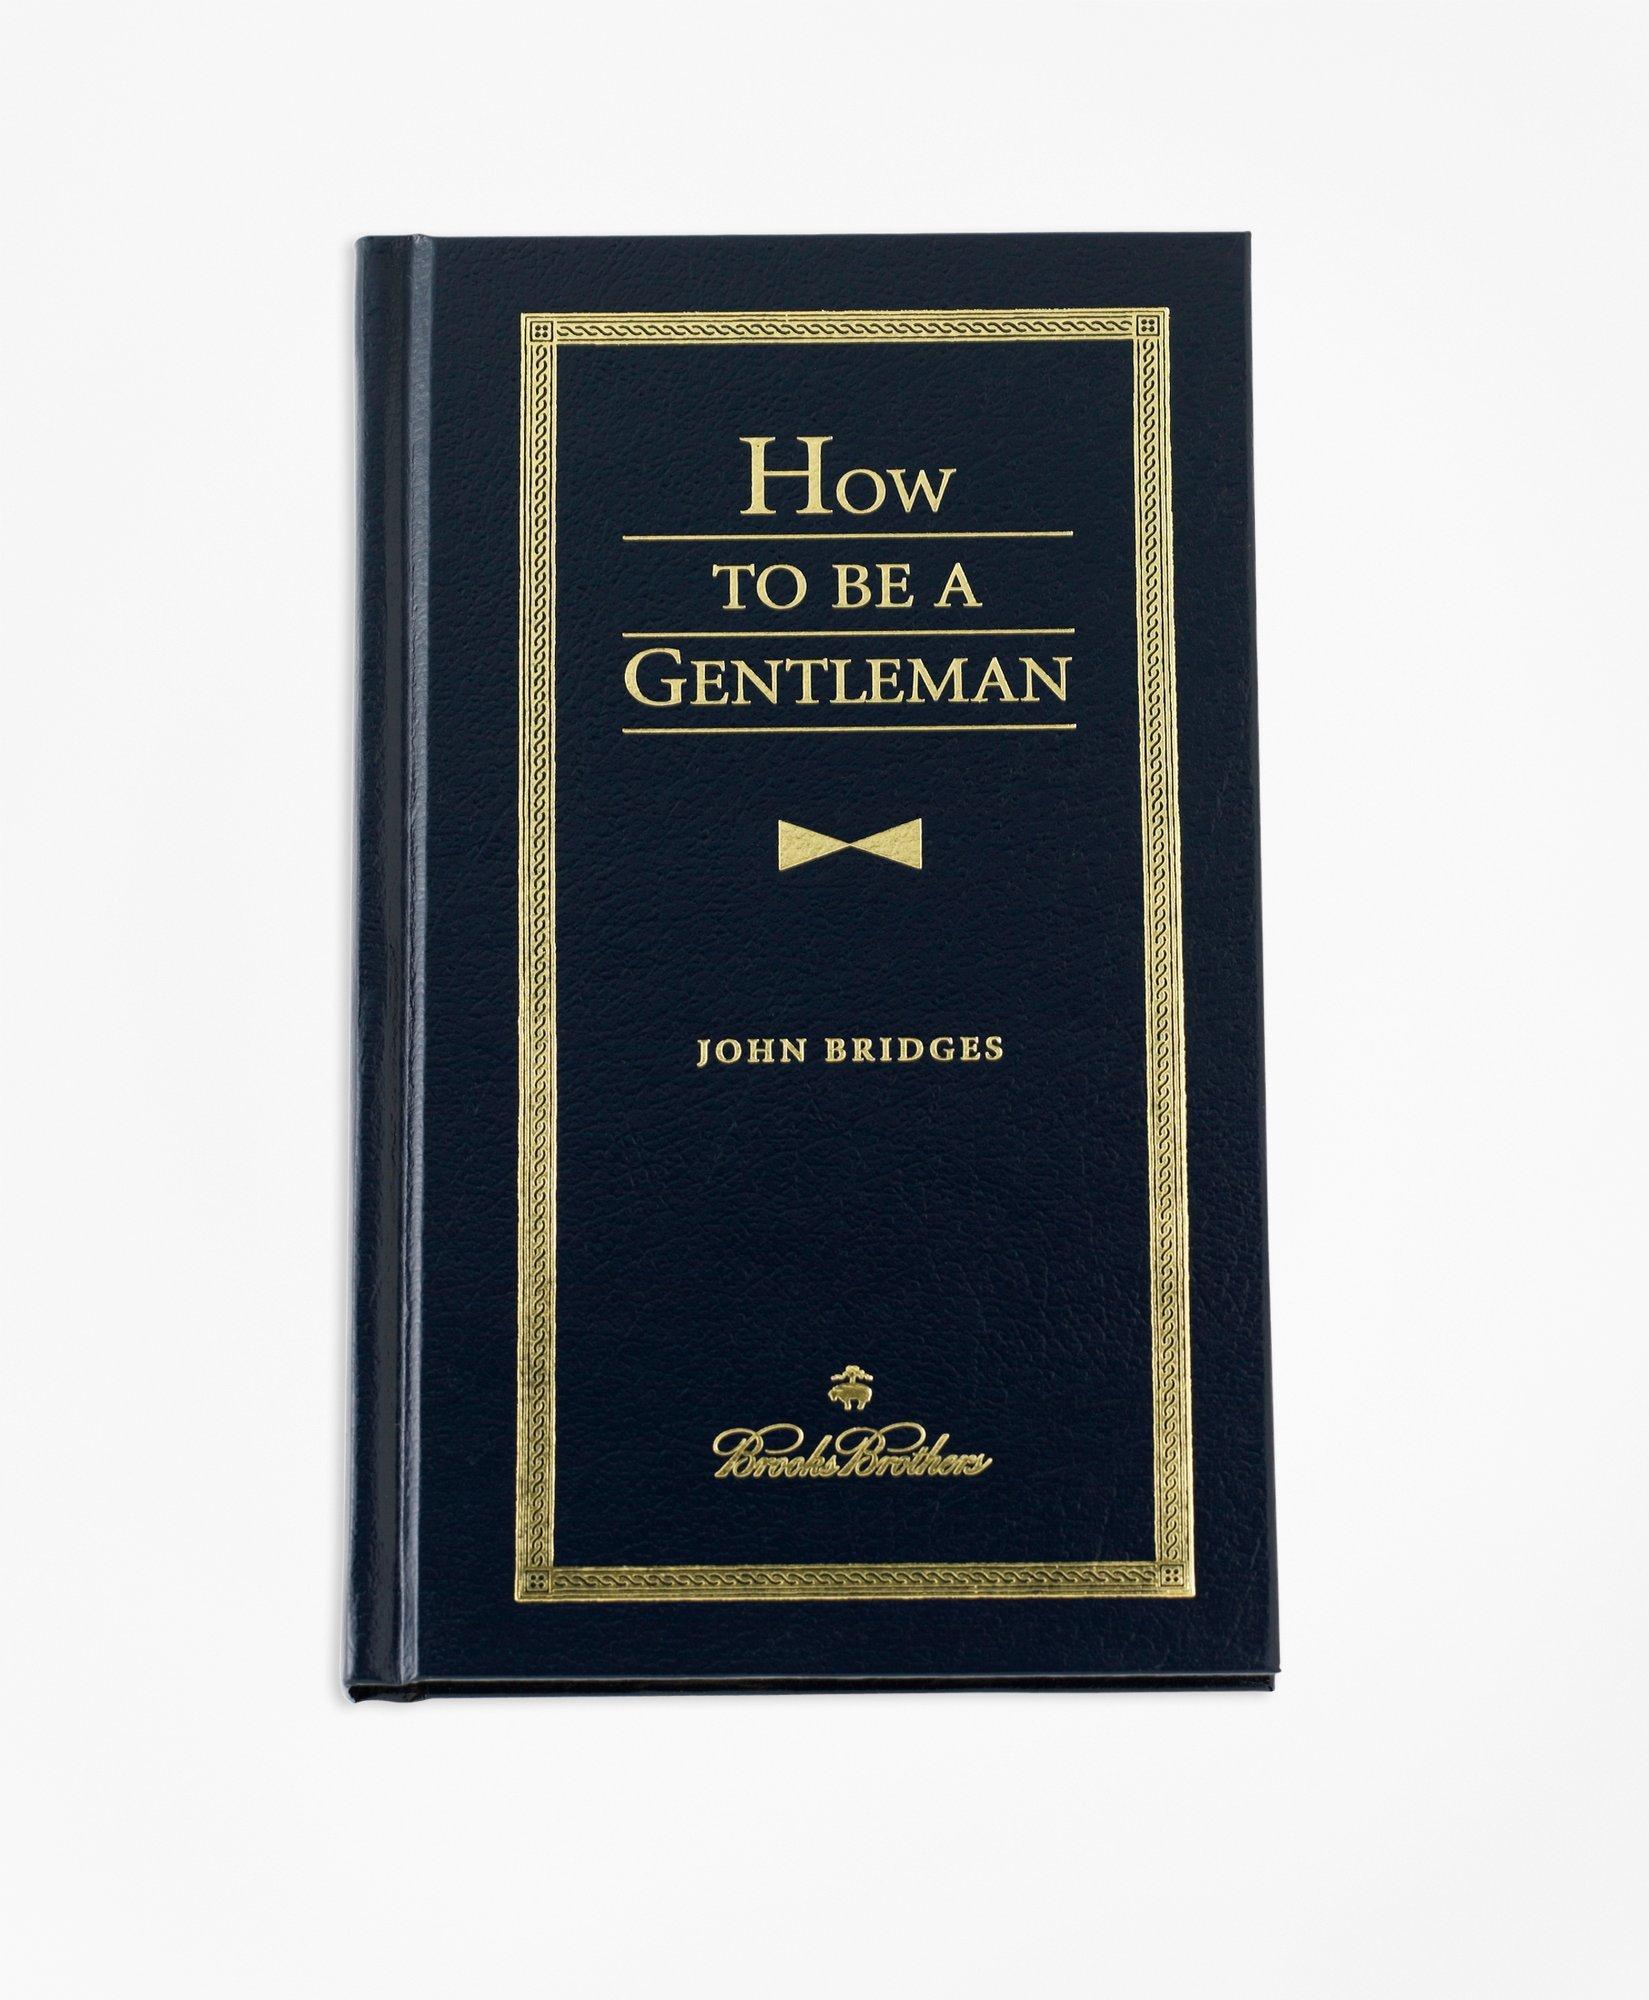 How To Be A Gentleman, image 1